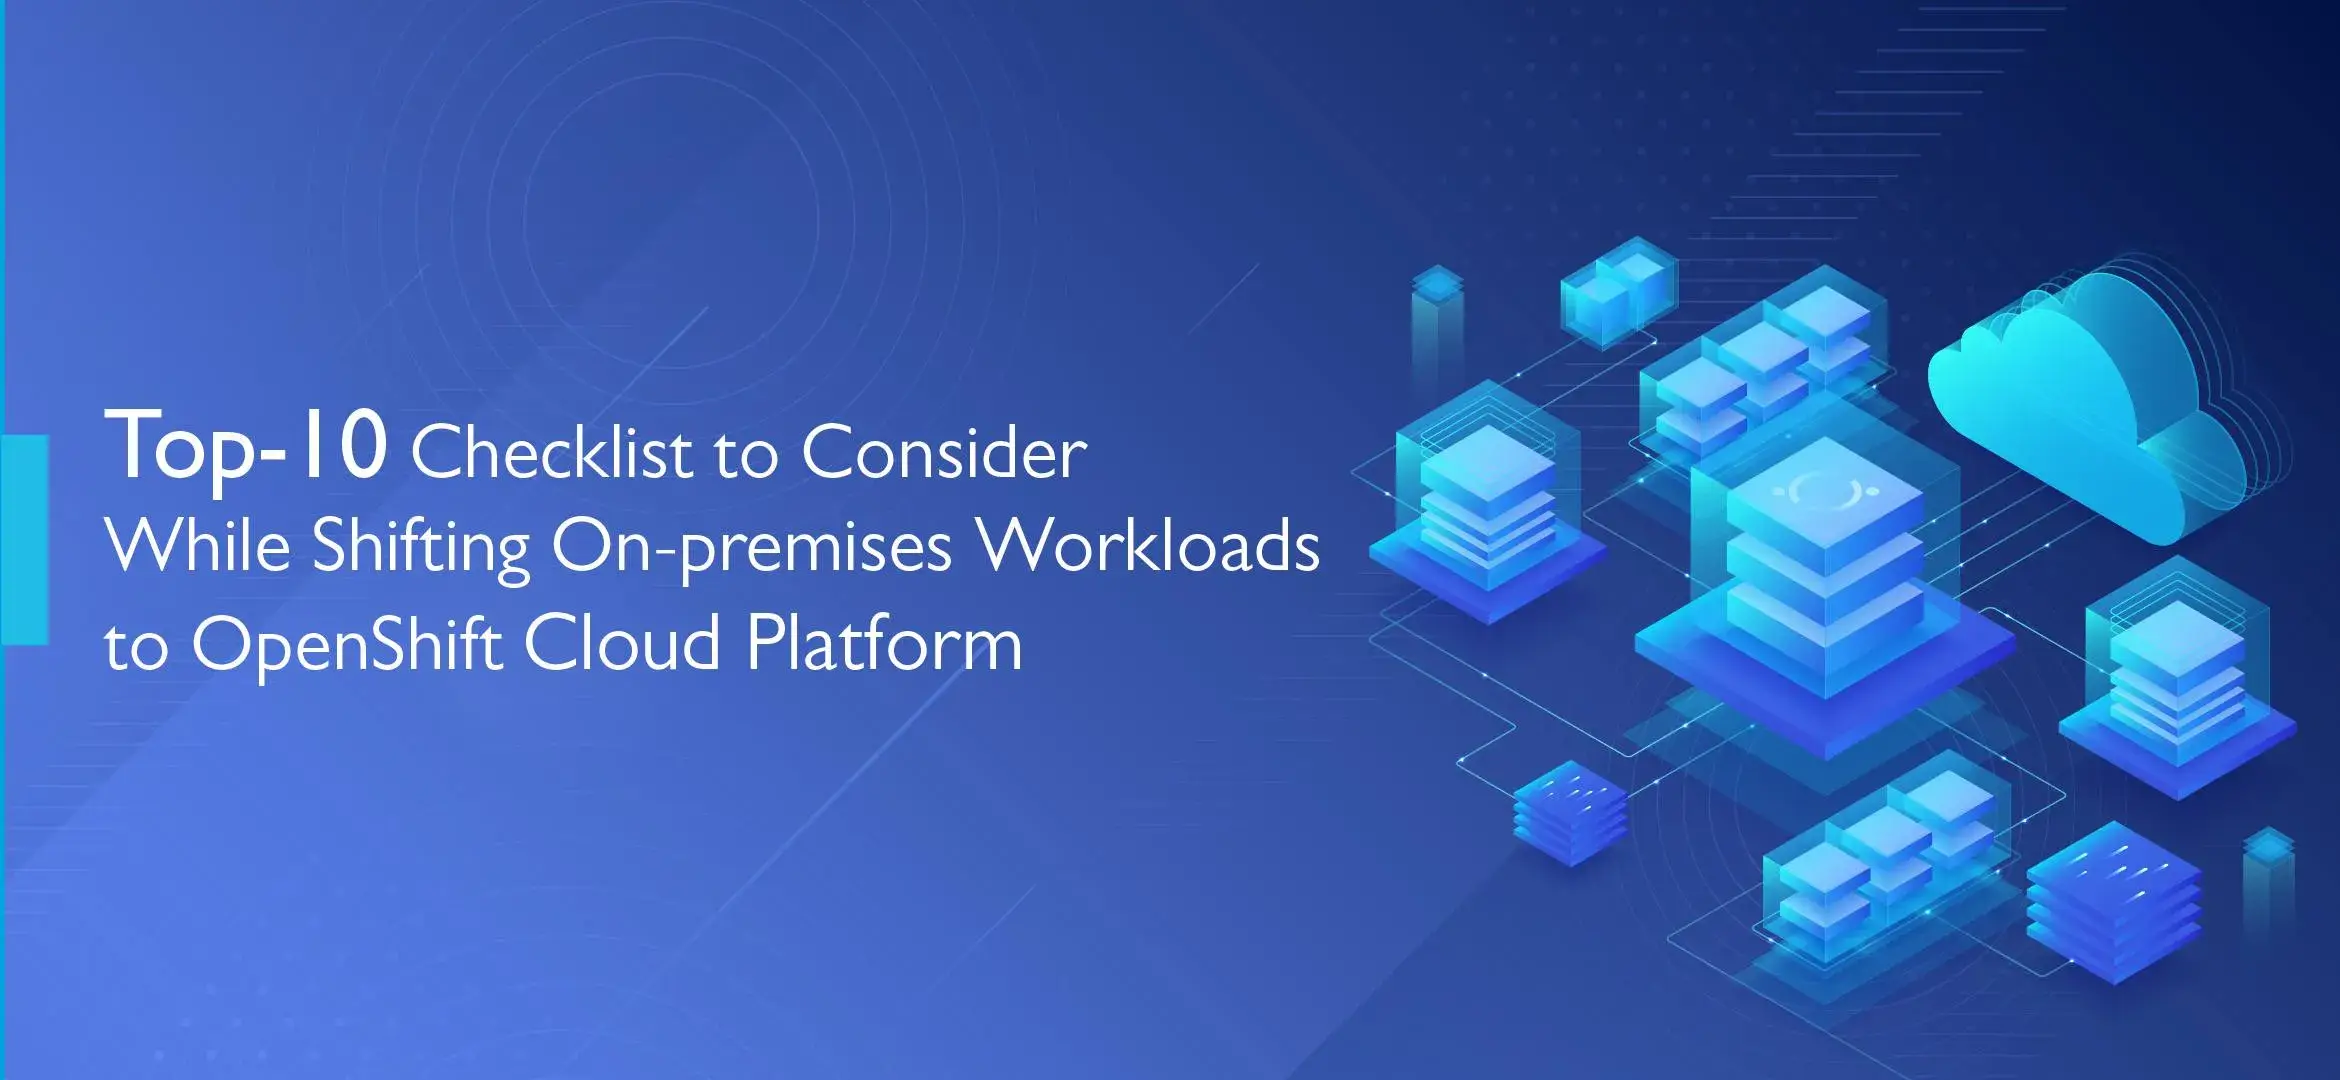 Top-10 Checklist to Consider While Shifting On-premises Workloads to OpenShift Cloud Platform